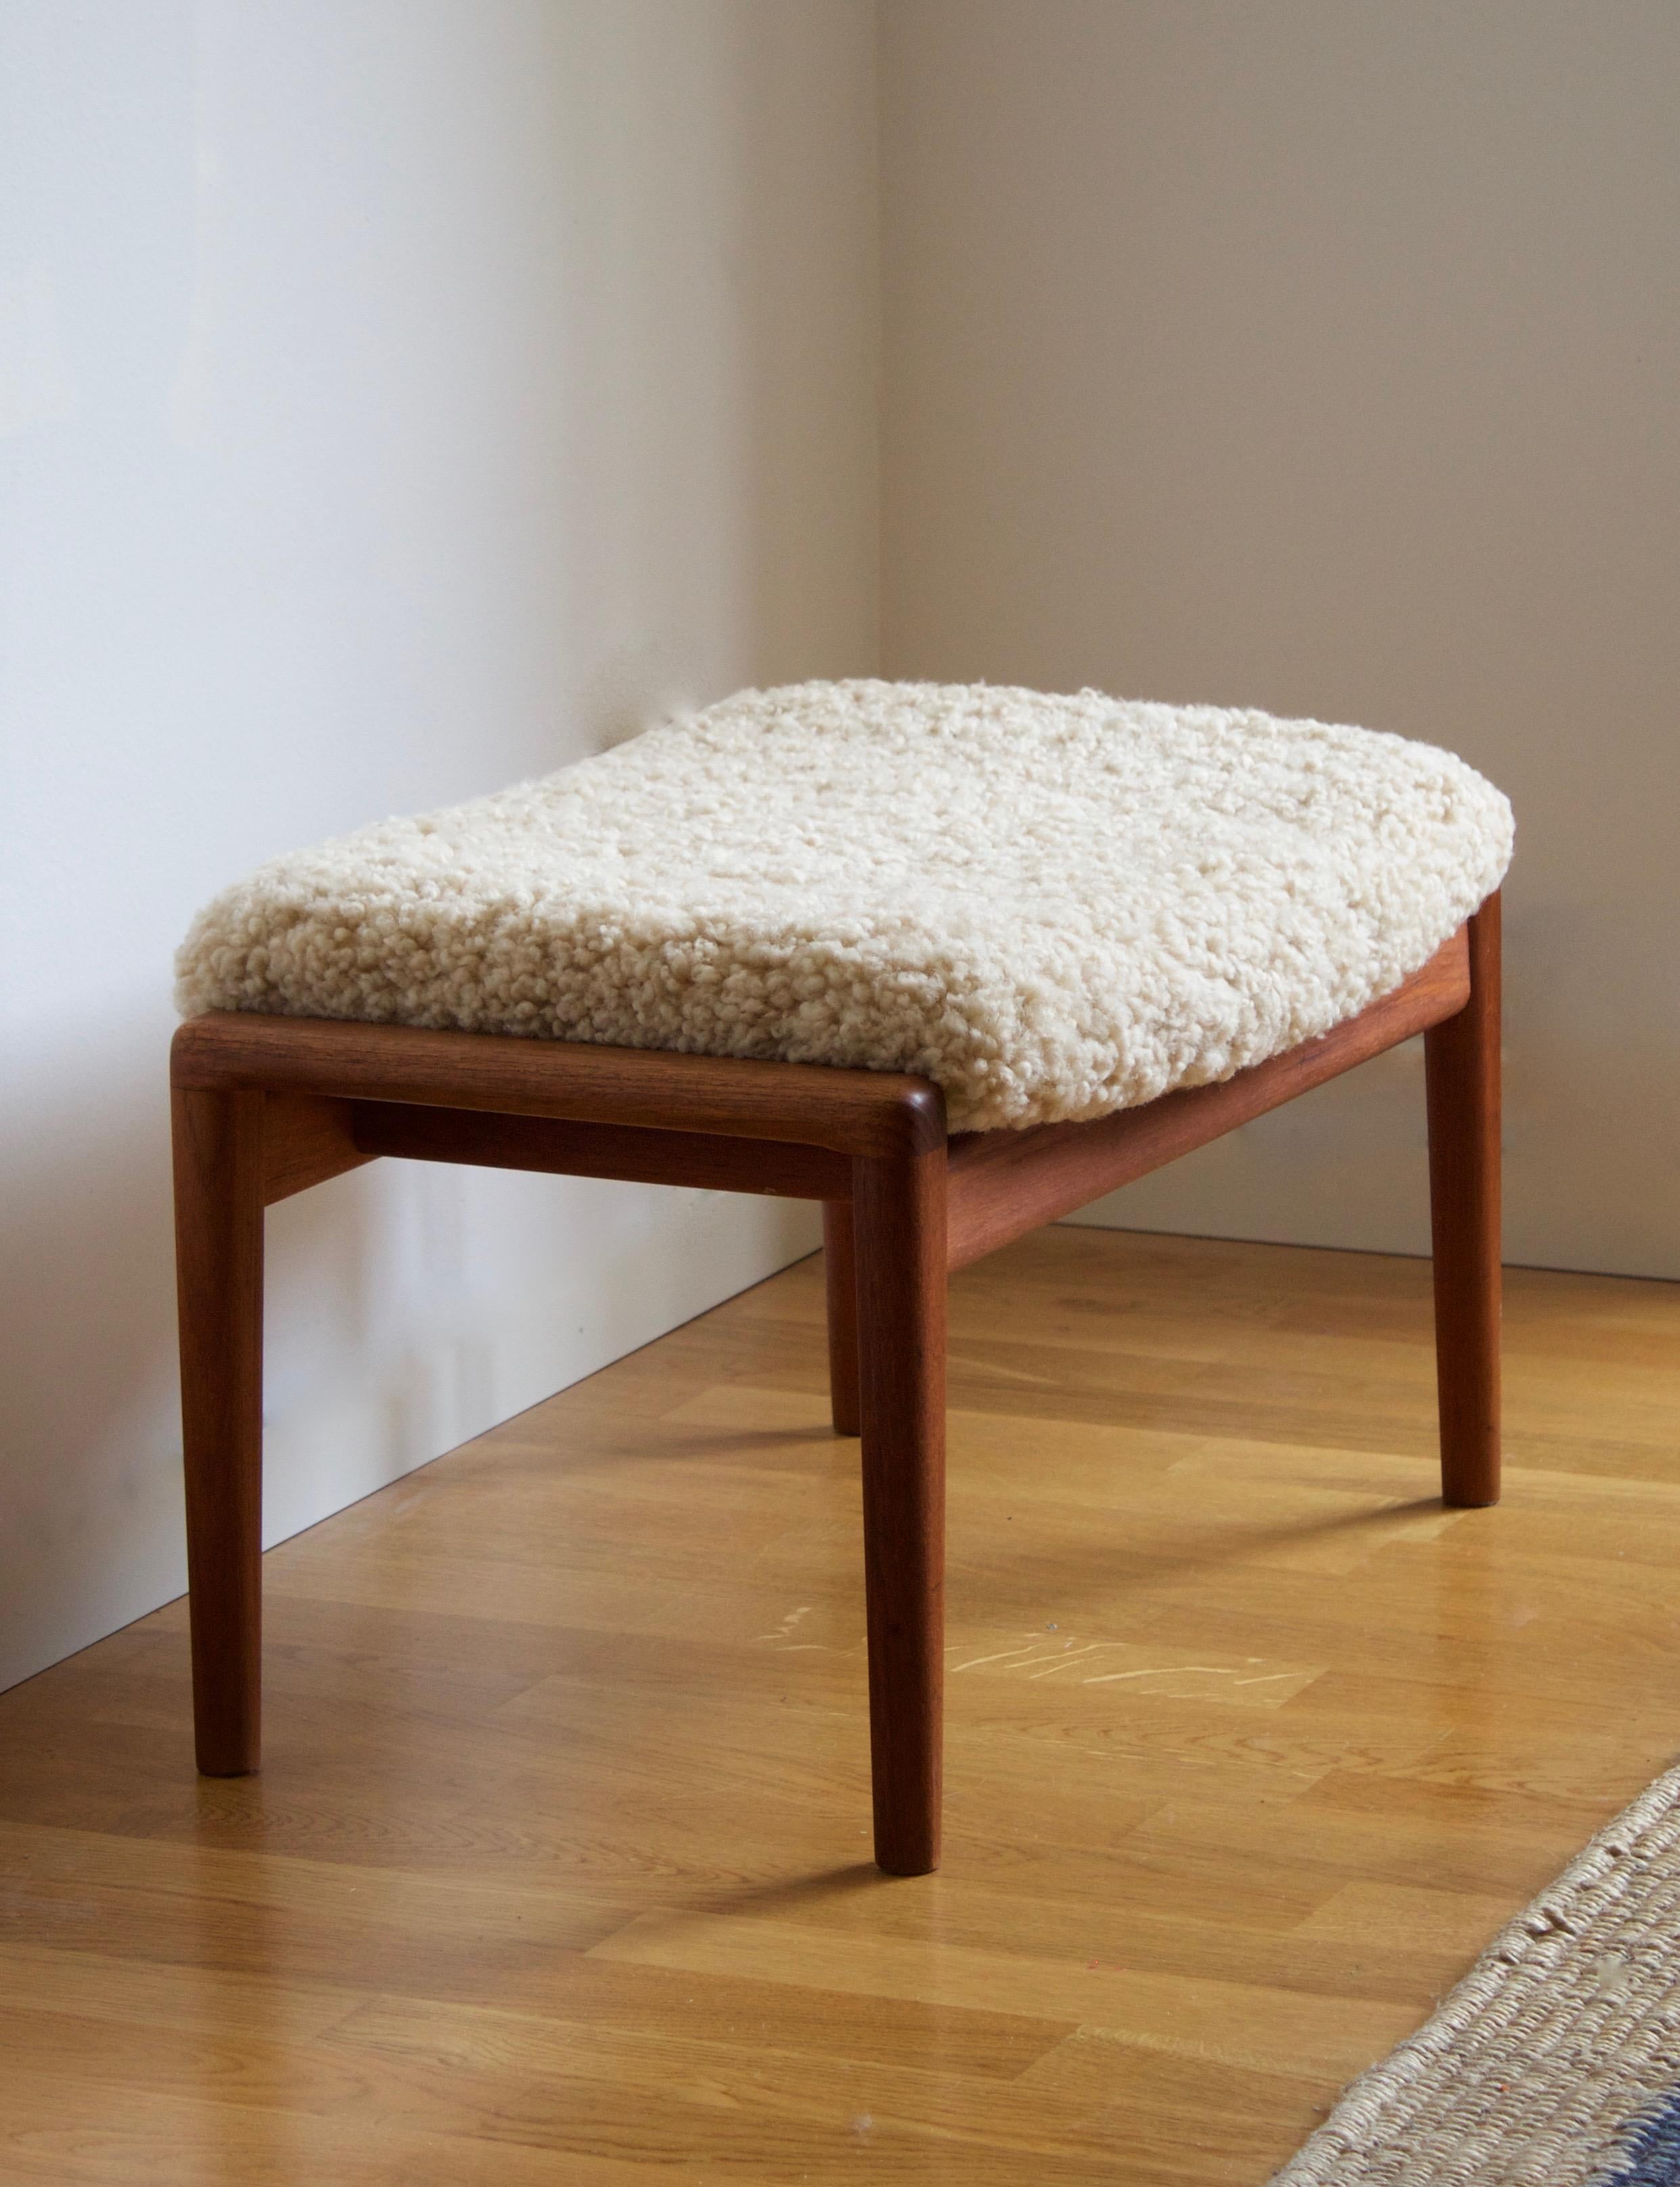 A stool in teak, overstuffed seat reupholstered in brand new sheepskin upholstery. Produced in Sweden, 1950s. Seats position is adjustable and can be tilted.

Other designers of the period include Finn Juhl, Hans Wegner, Isamu Noguchi, Charlotte